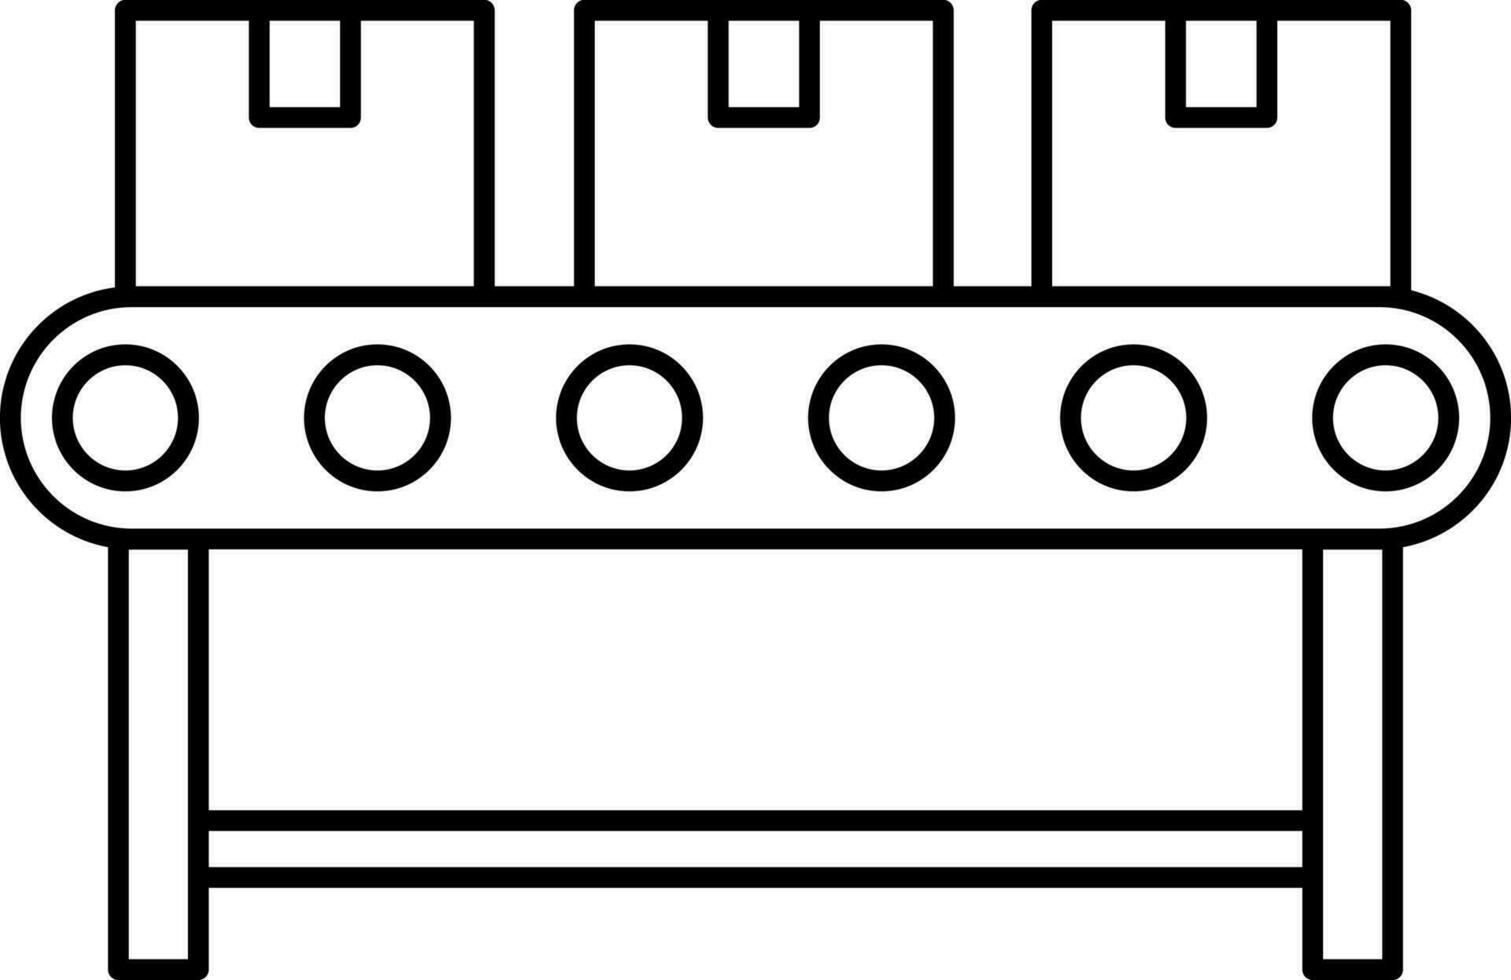 Conveyor With Boxes Icon In Black Line Art. vector